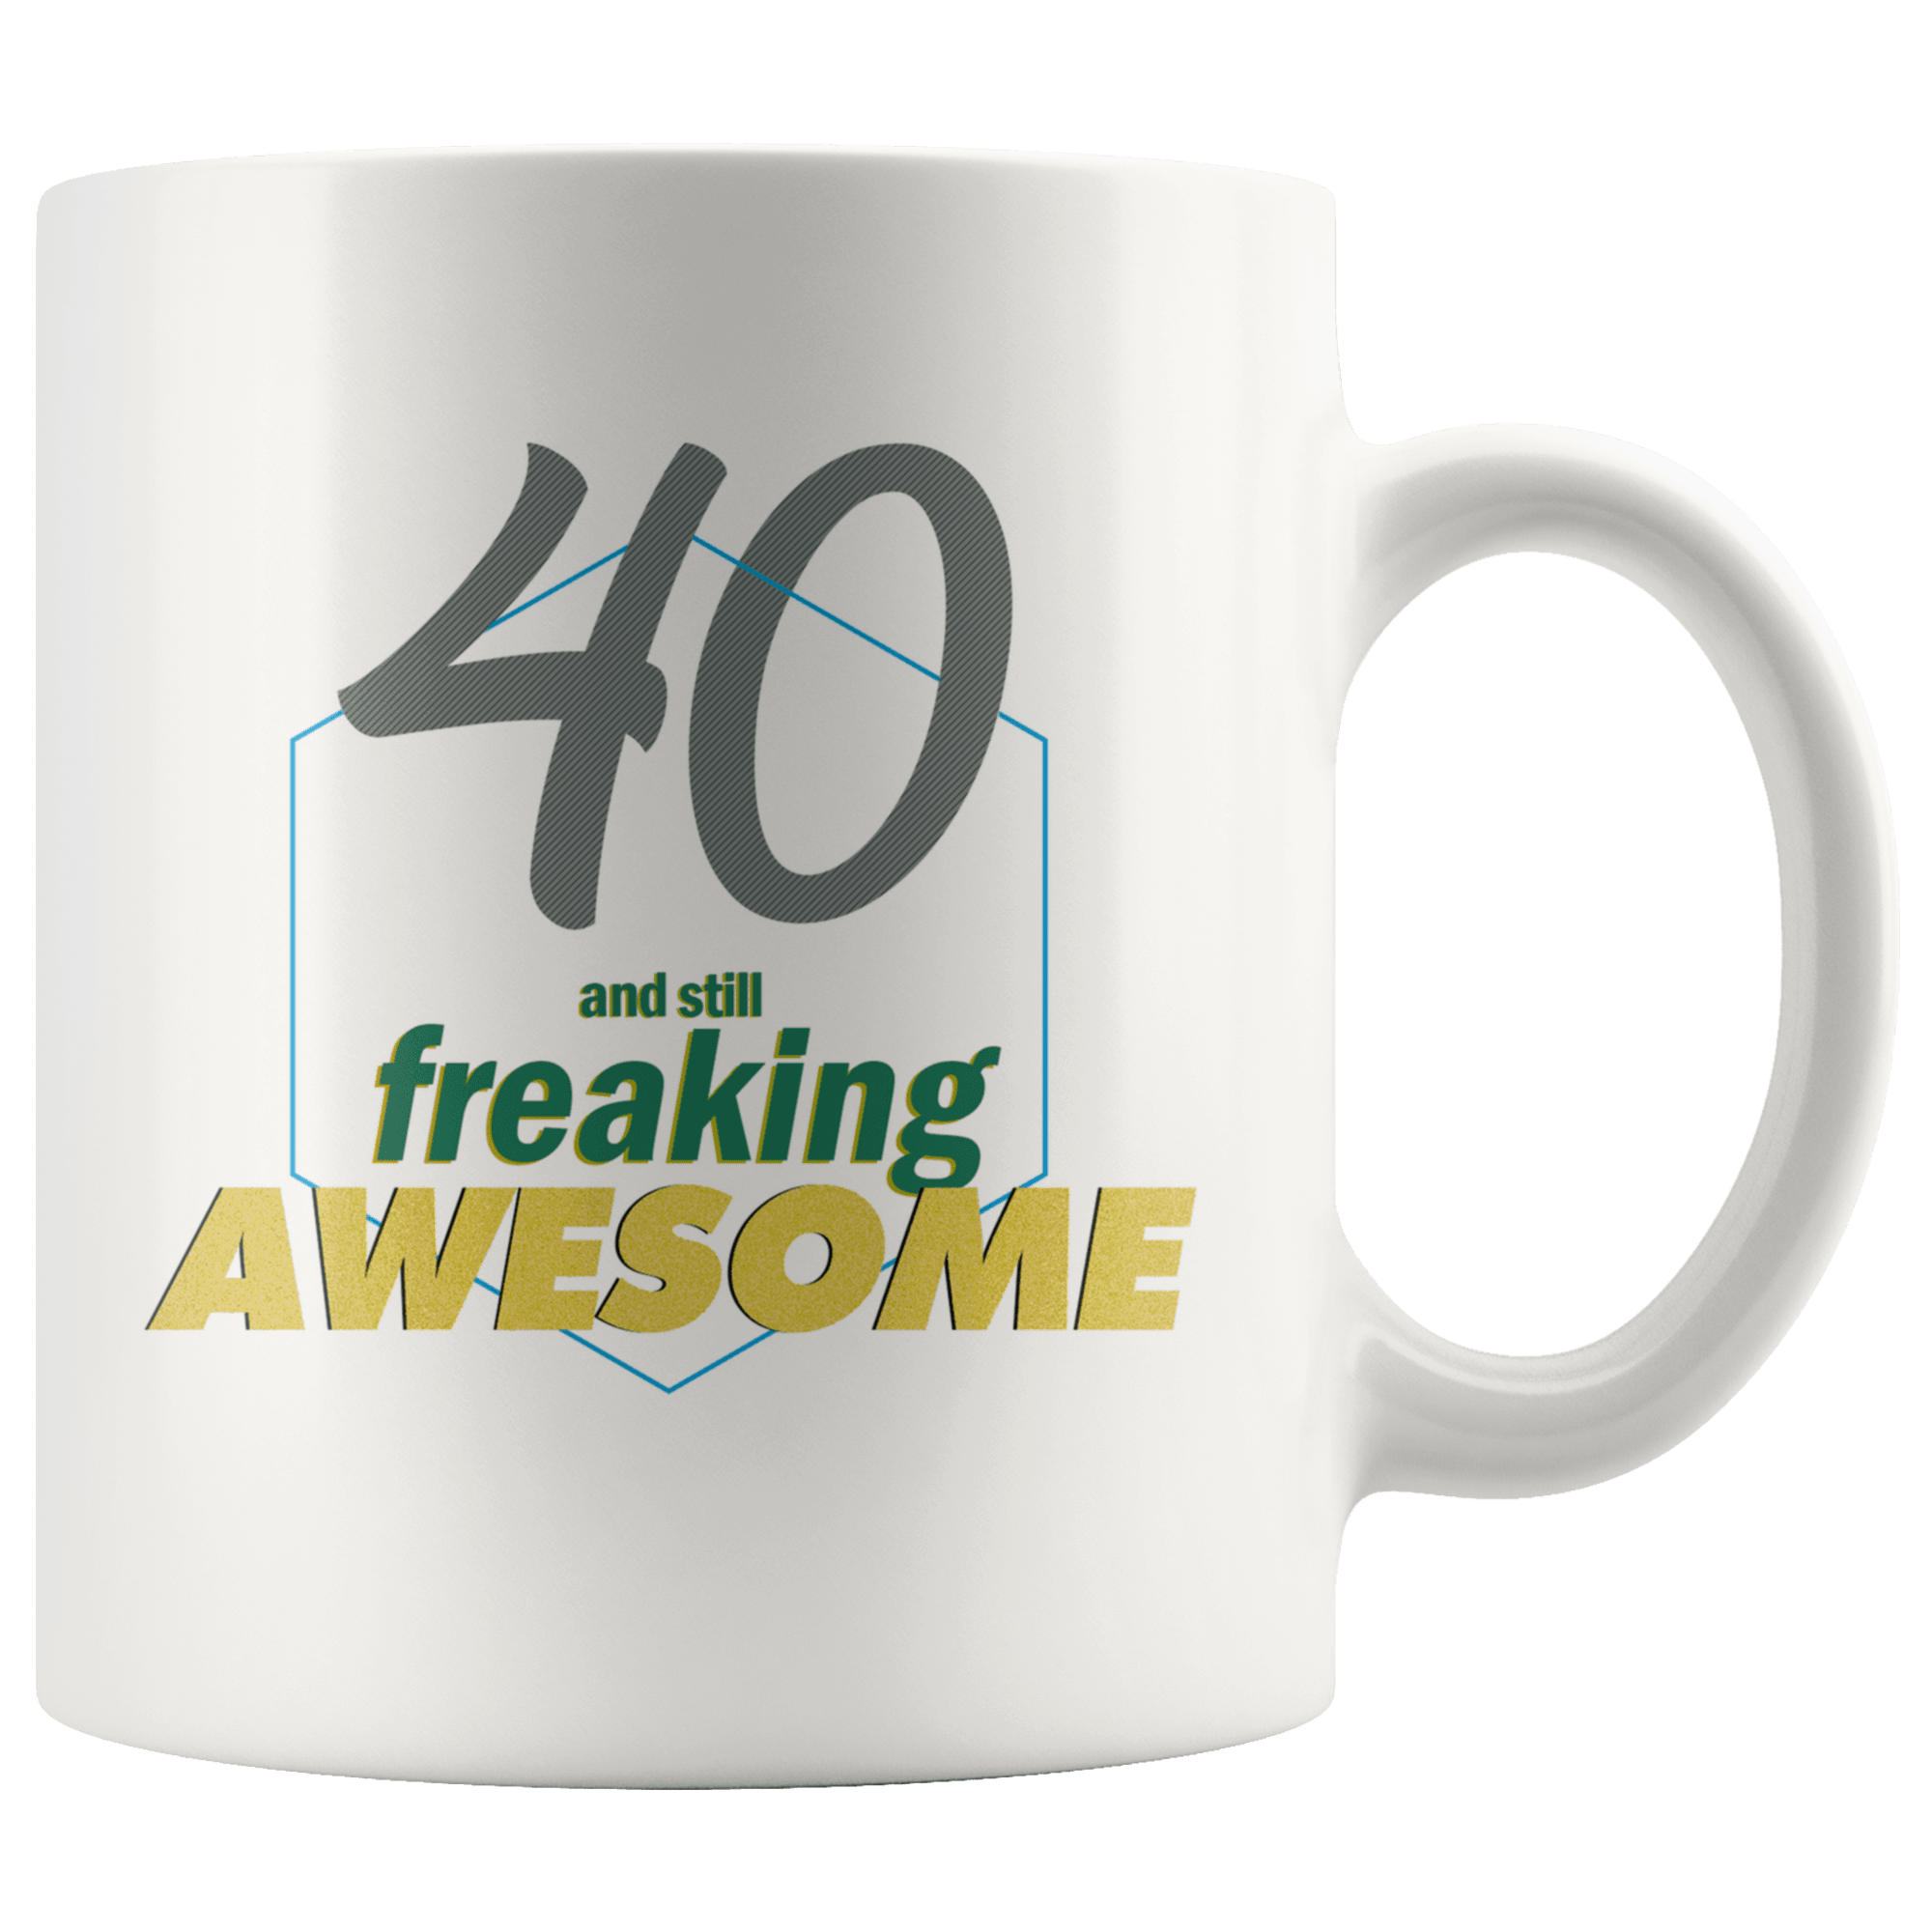 40 And Still Freaking Awesome - 40th Birthday Coffee Mug - Great Gift For Men and Women Celebrating 40 Years Old Birthday - Meaningful For Someone Reaching Fortieth Birthday. - SPCM